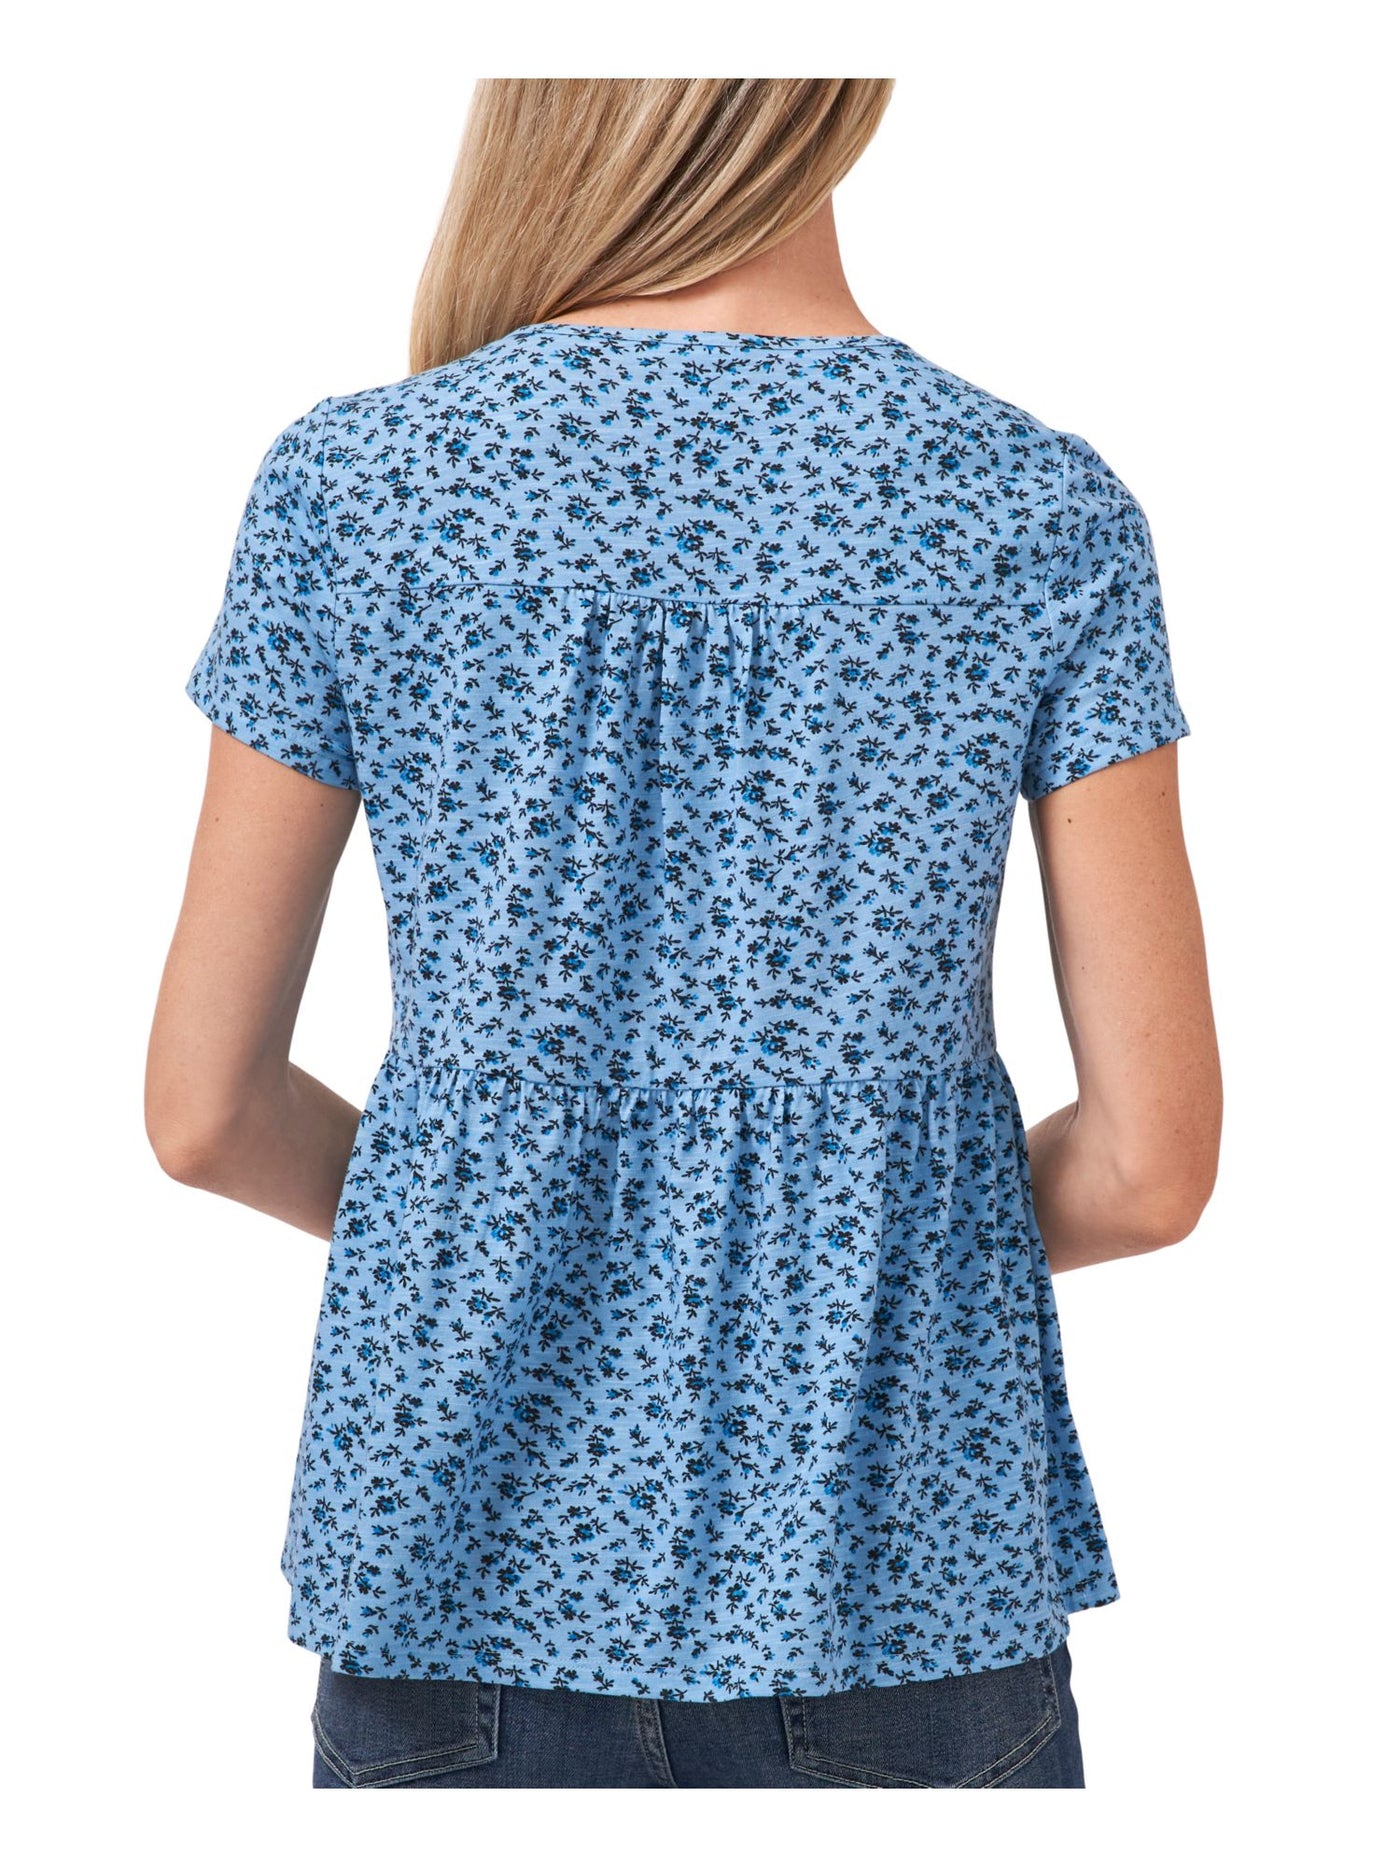 CECE Womens Blue Floral Short Sleeve Crew Neck Sweater S